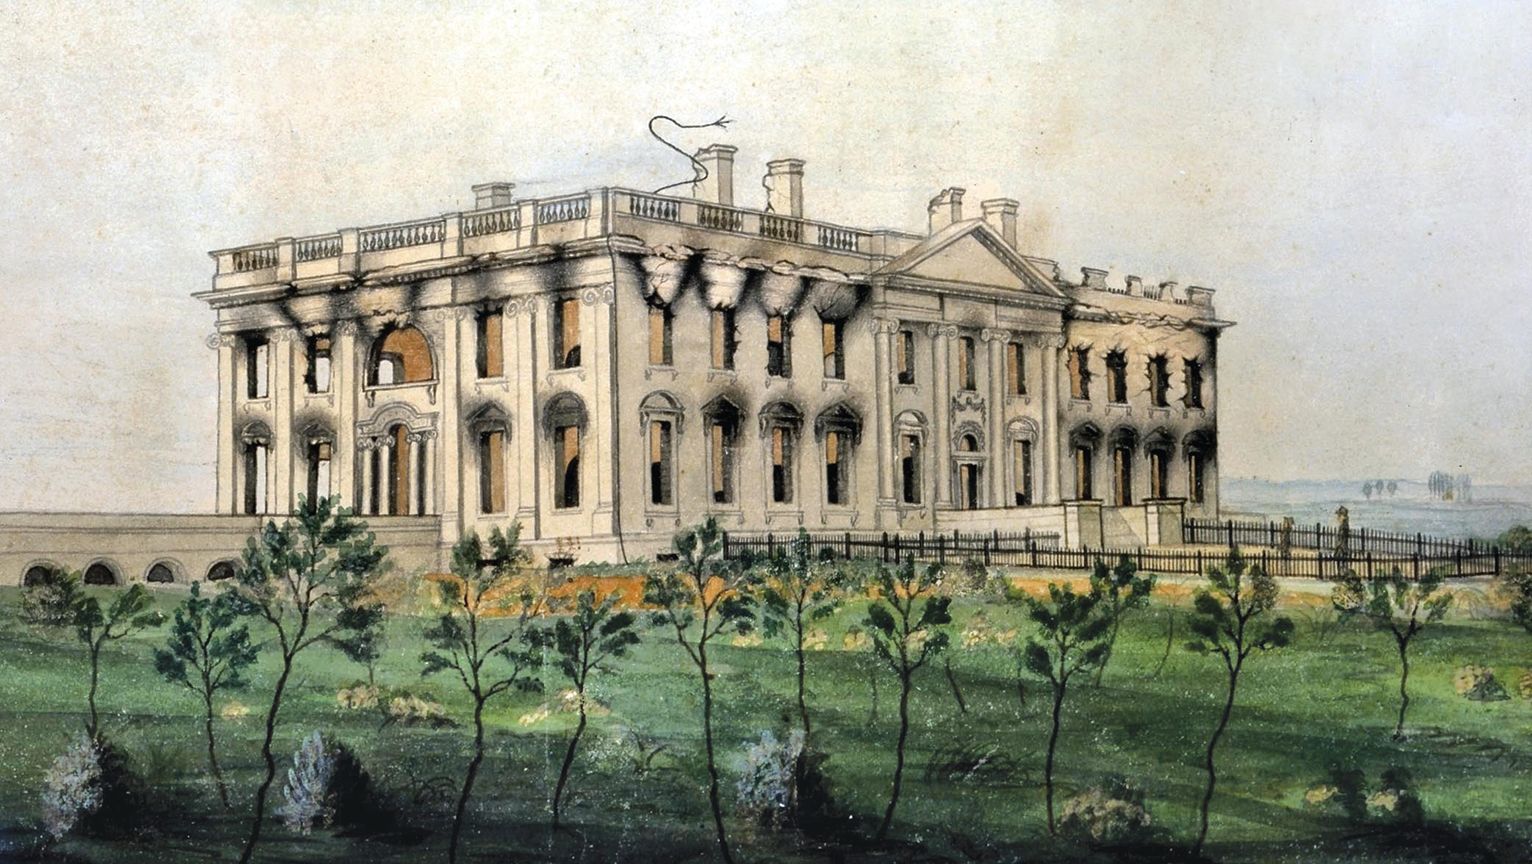 The White House as it appeared after the attack, with soot and ash visible above the windows. Mordecai Booth tried to alert the President of the impending British attack, but found that the President, First Lady, staff, and his military guard had already evacuated. 